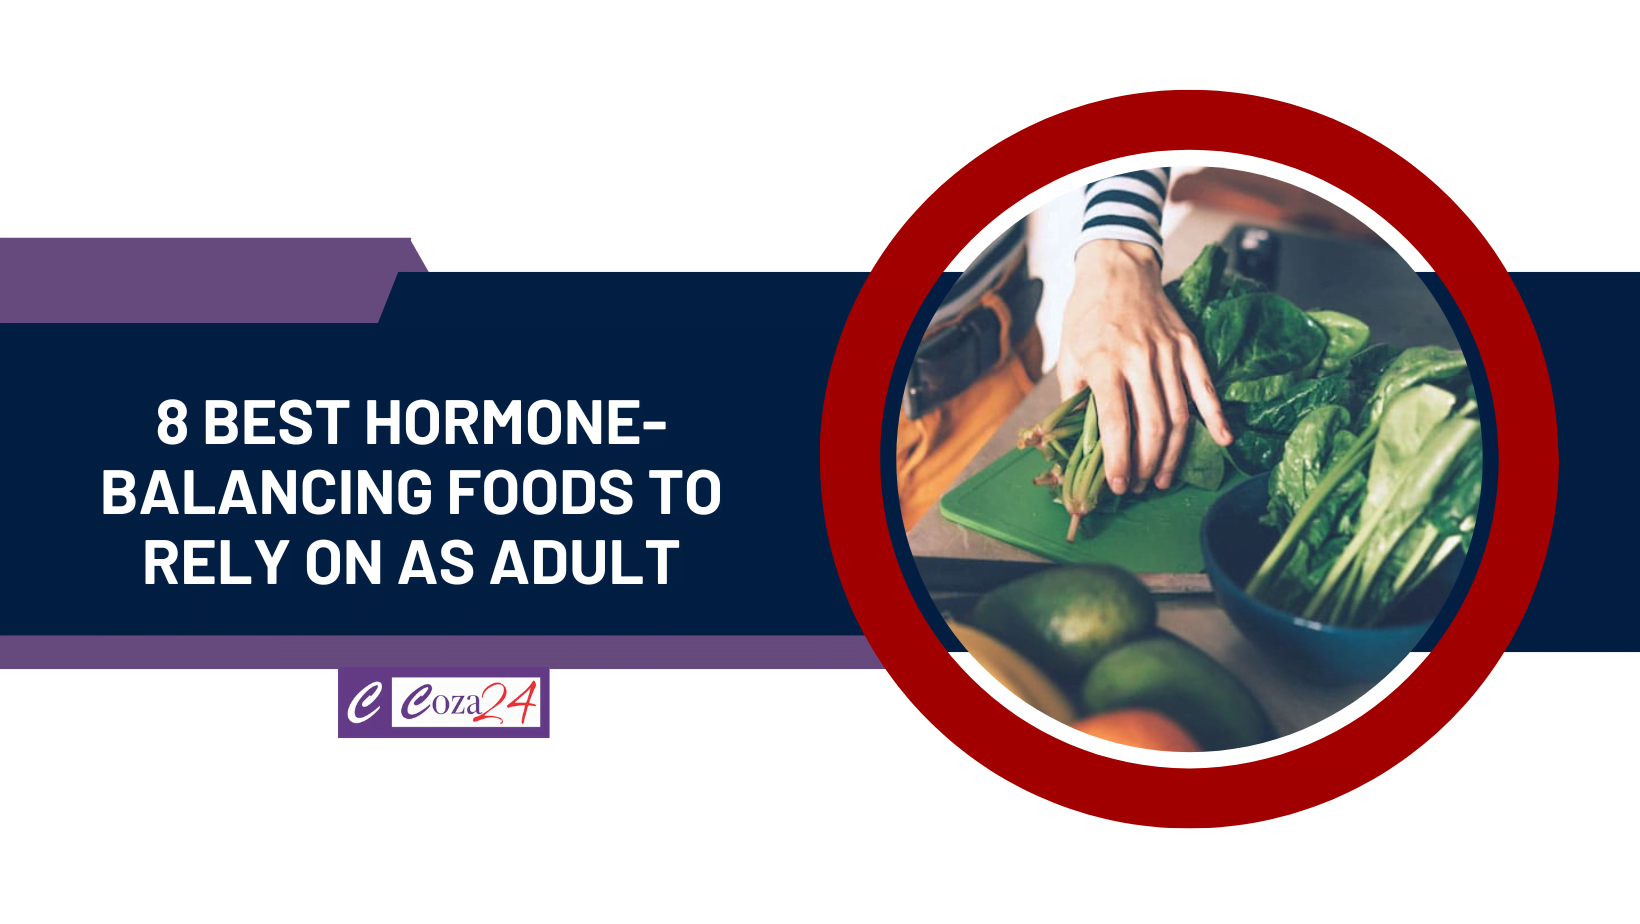 8 Best Hormone-Balancing Foods To Rely On As Adult